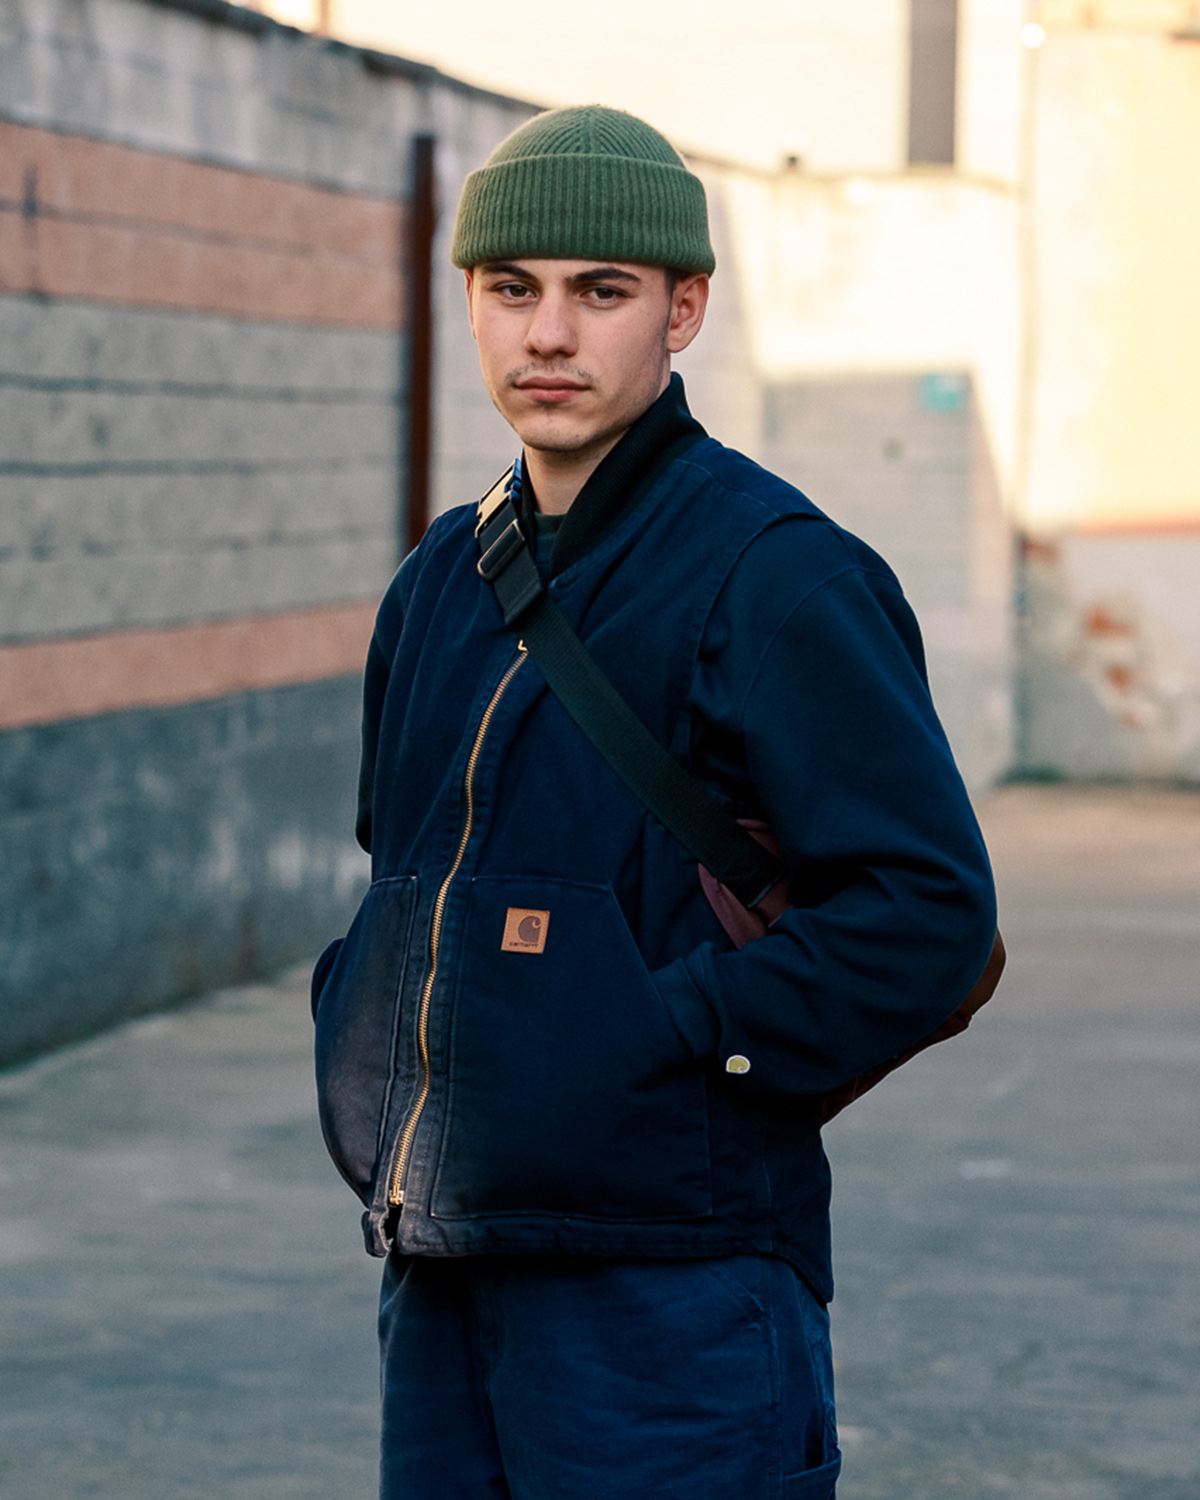 Carhartt Style Guide for Men: The Best Looks for 2022